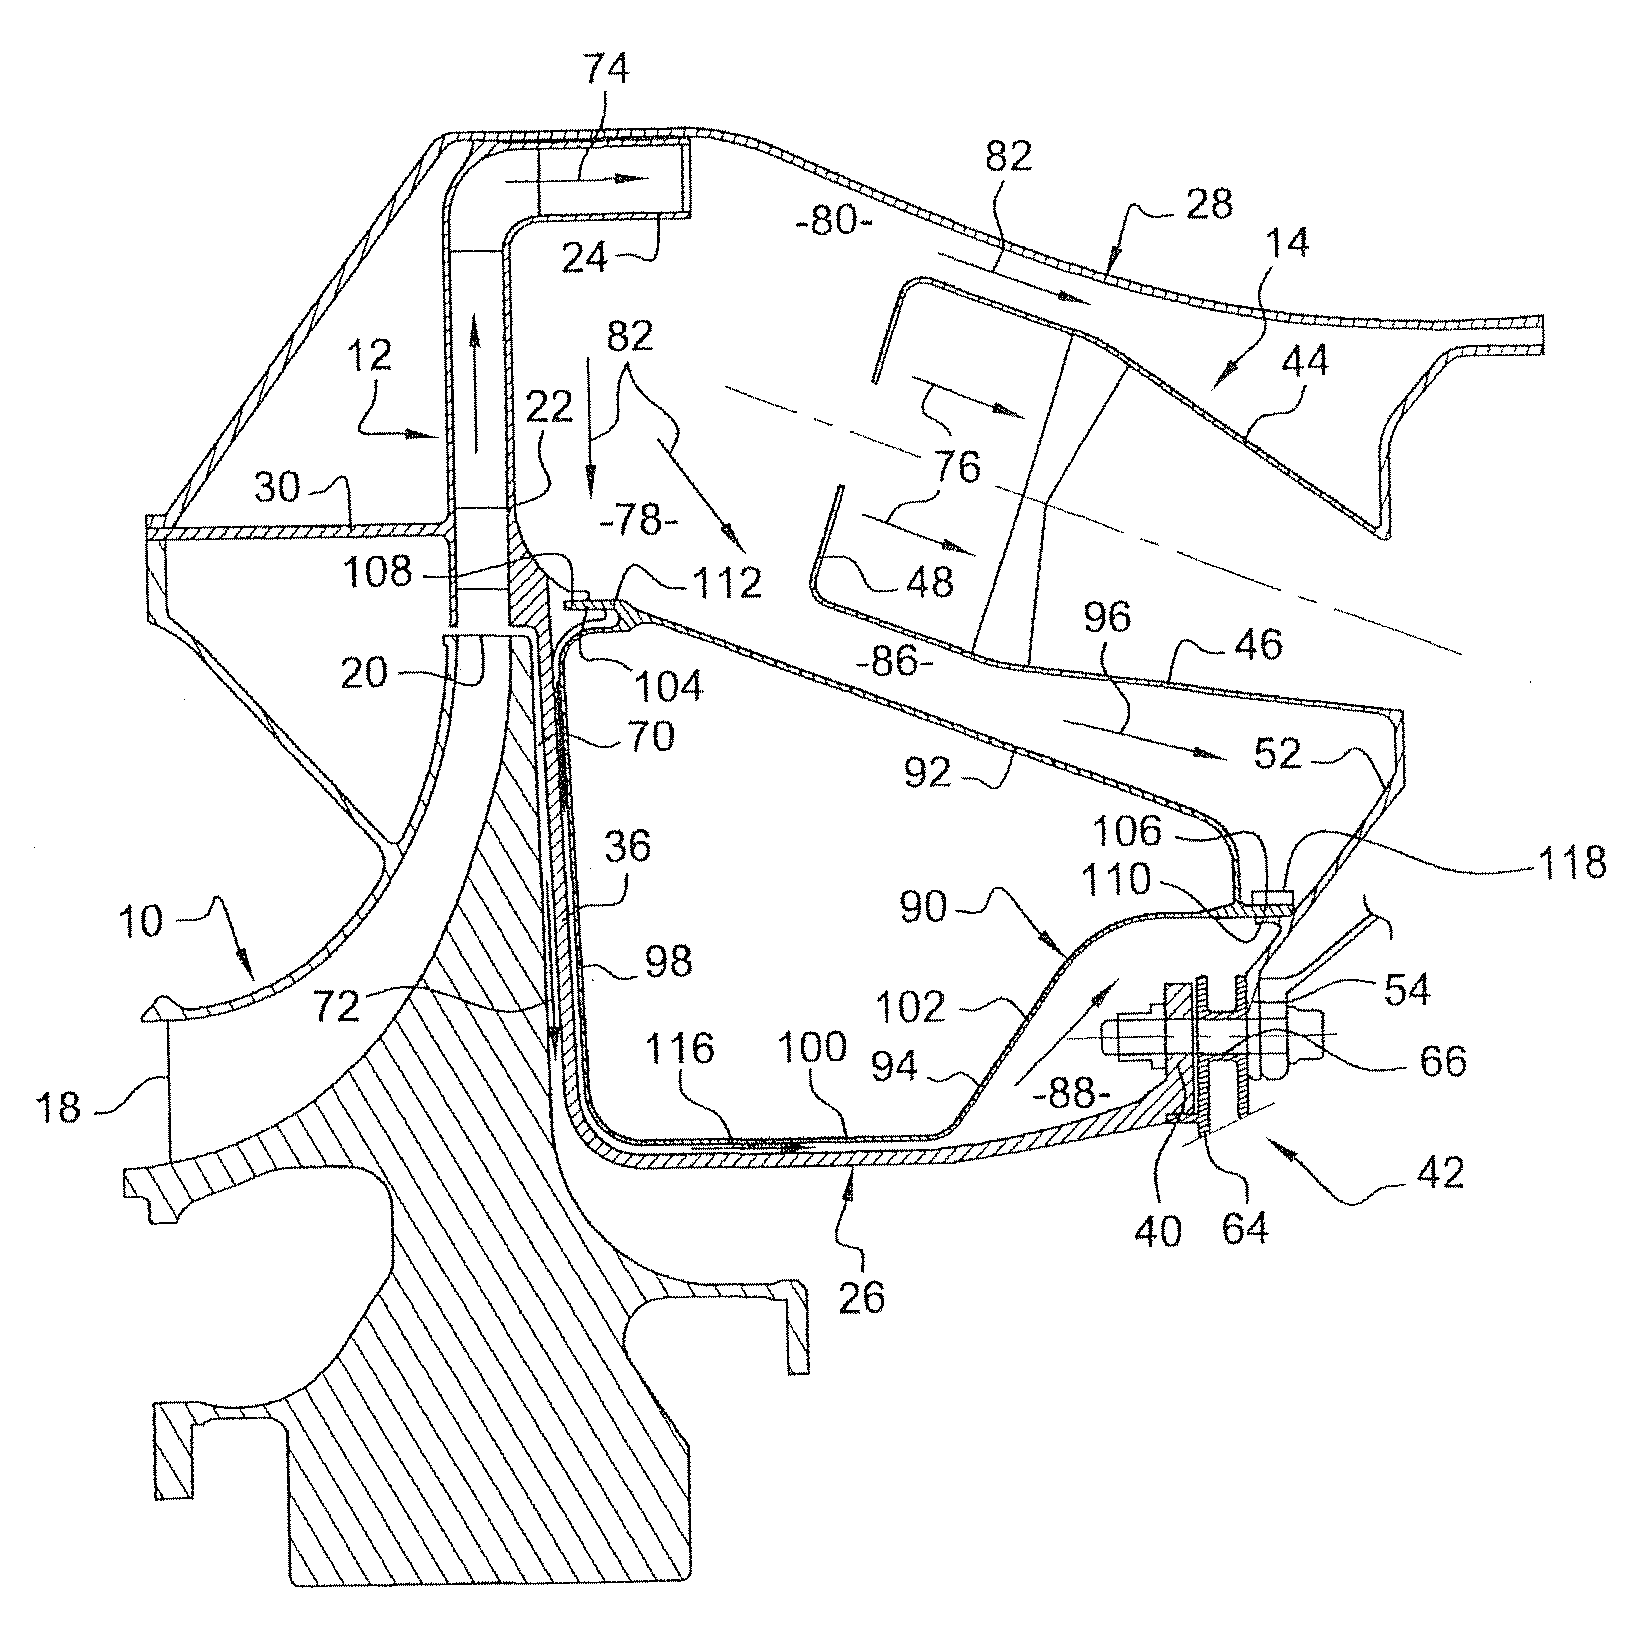 System for ventilating a combustion chamber wall